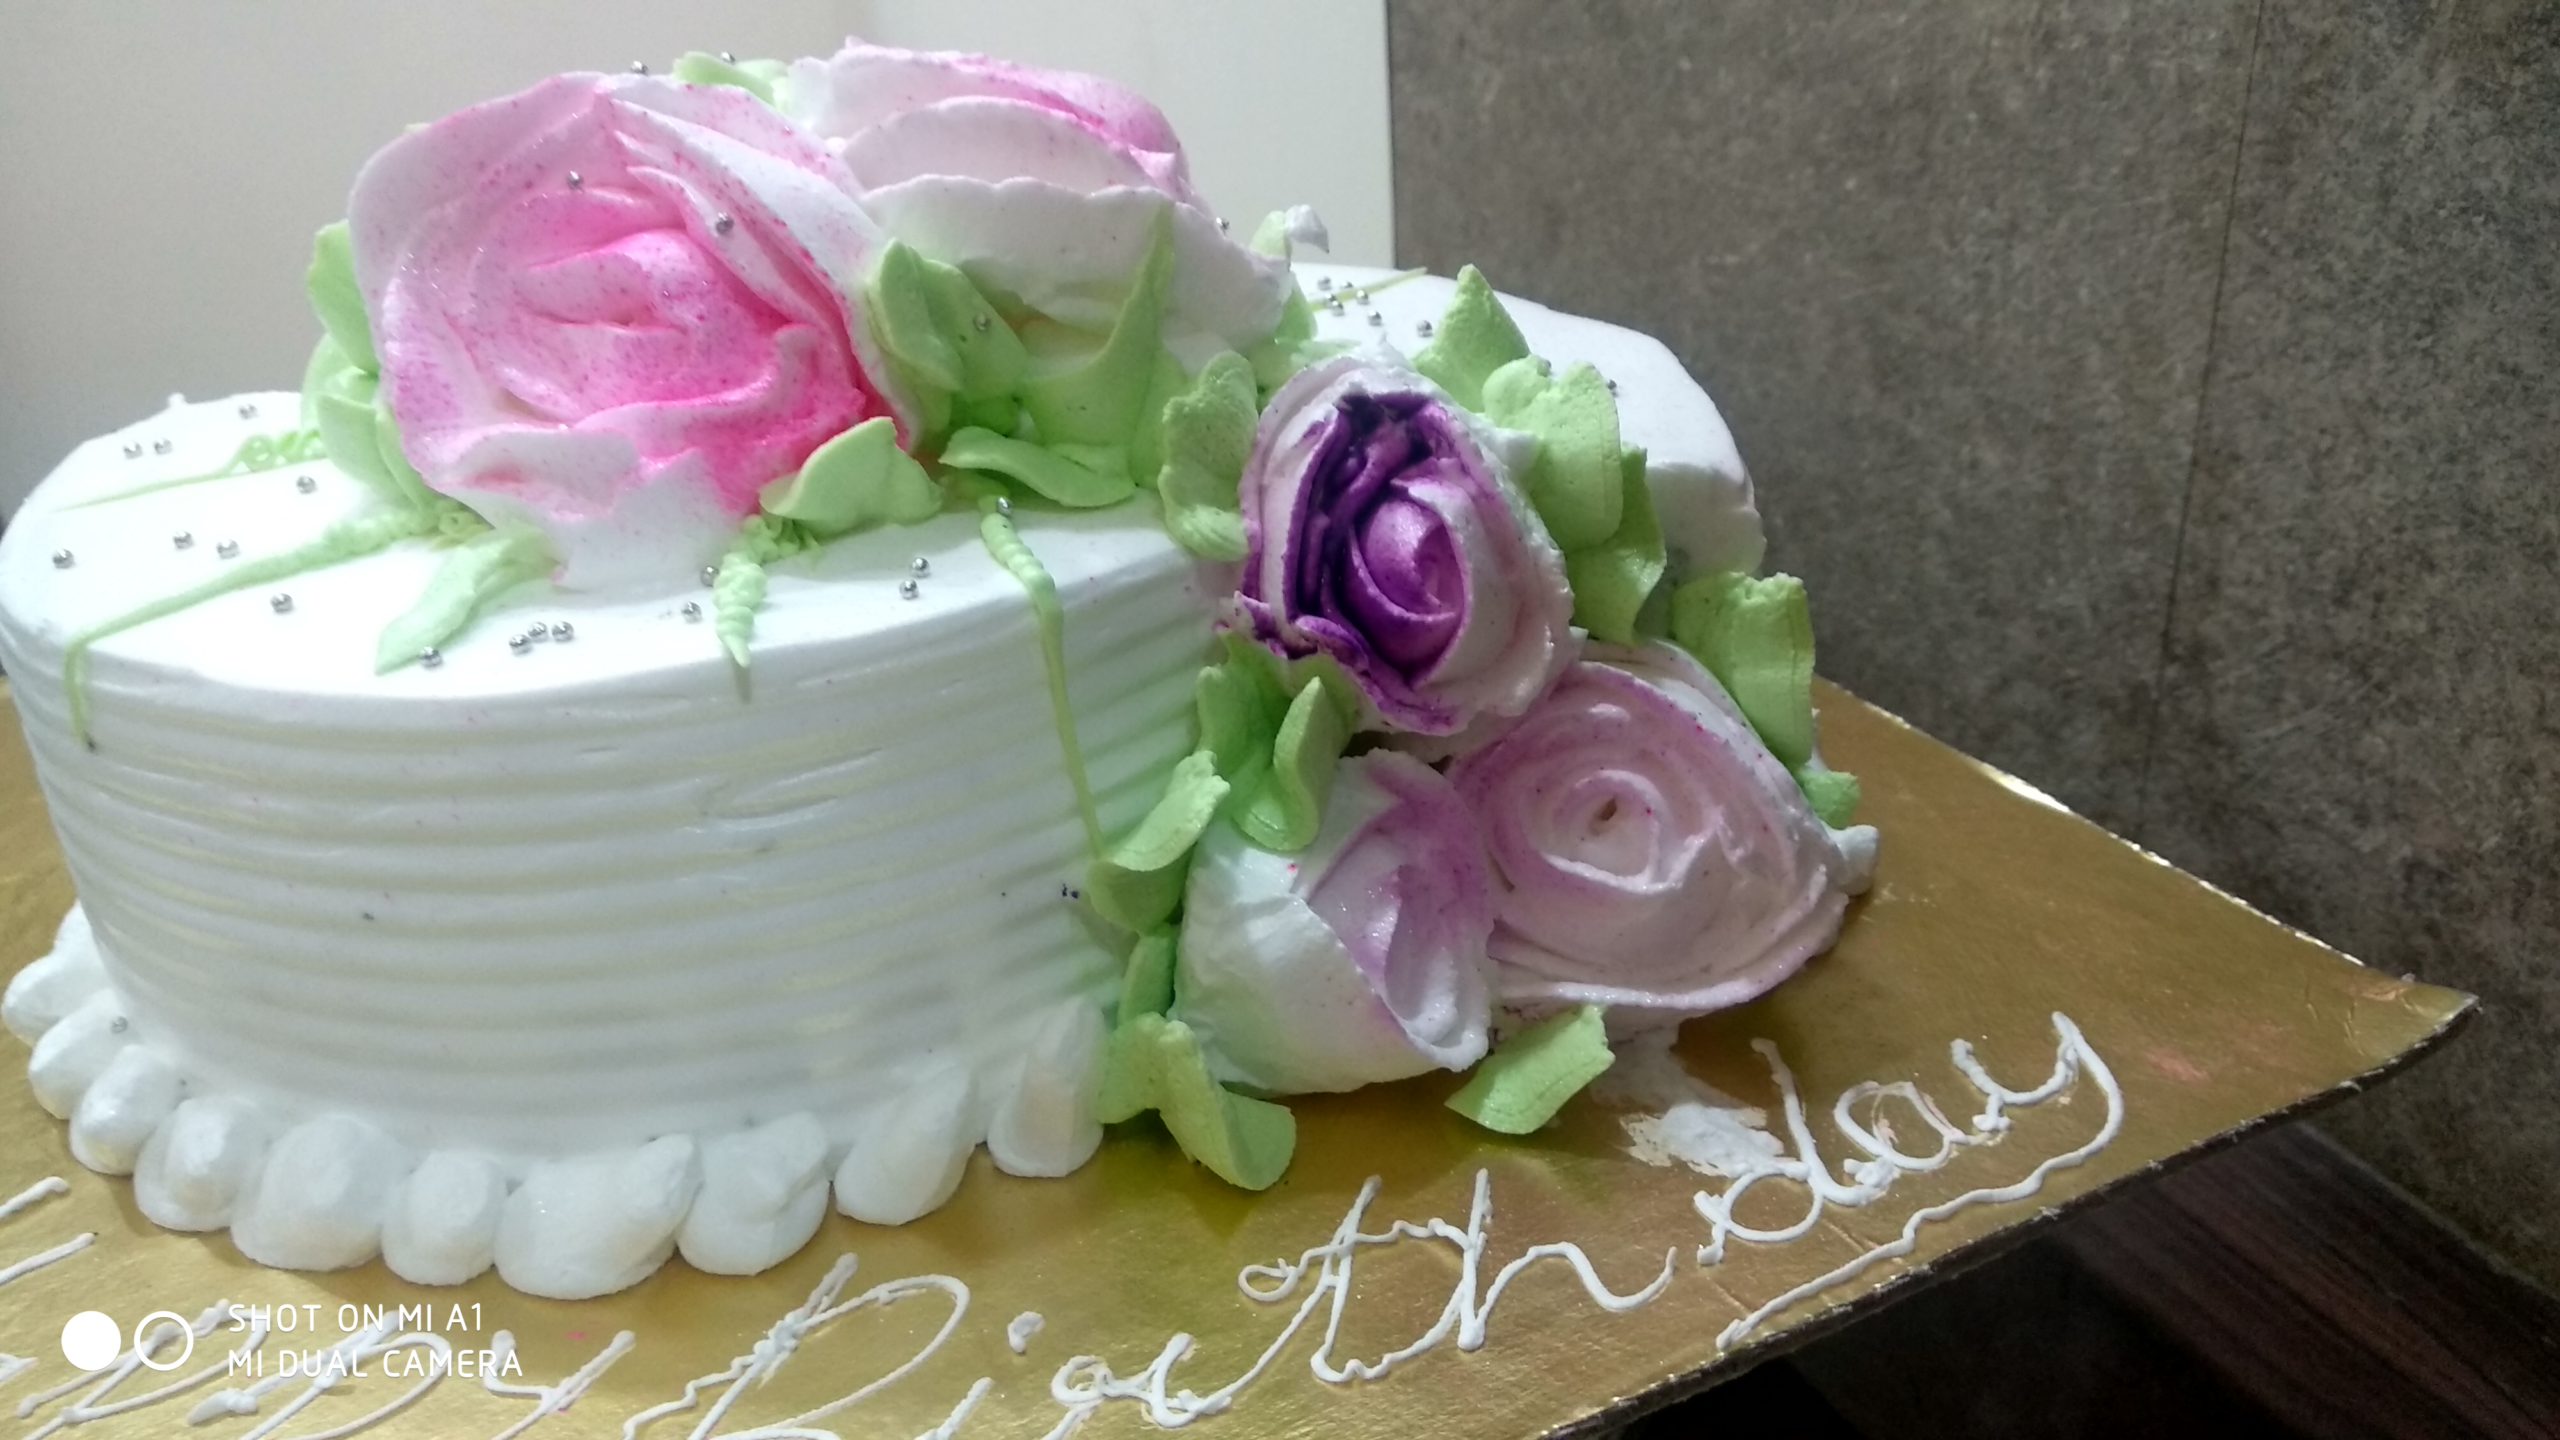 Strawberry And Chocolate Cake Designs, Images, Price Near Me